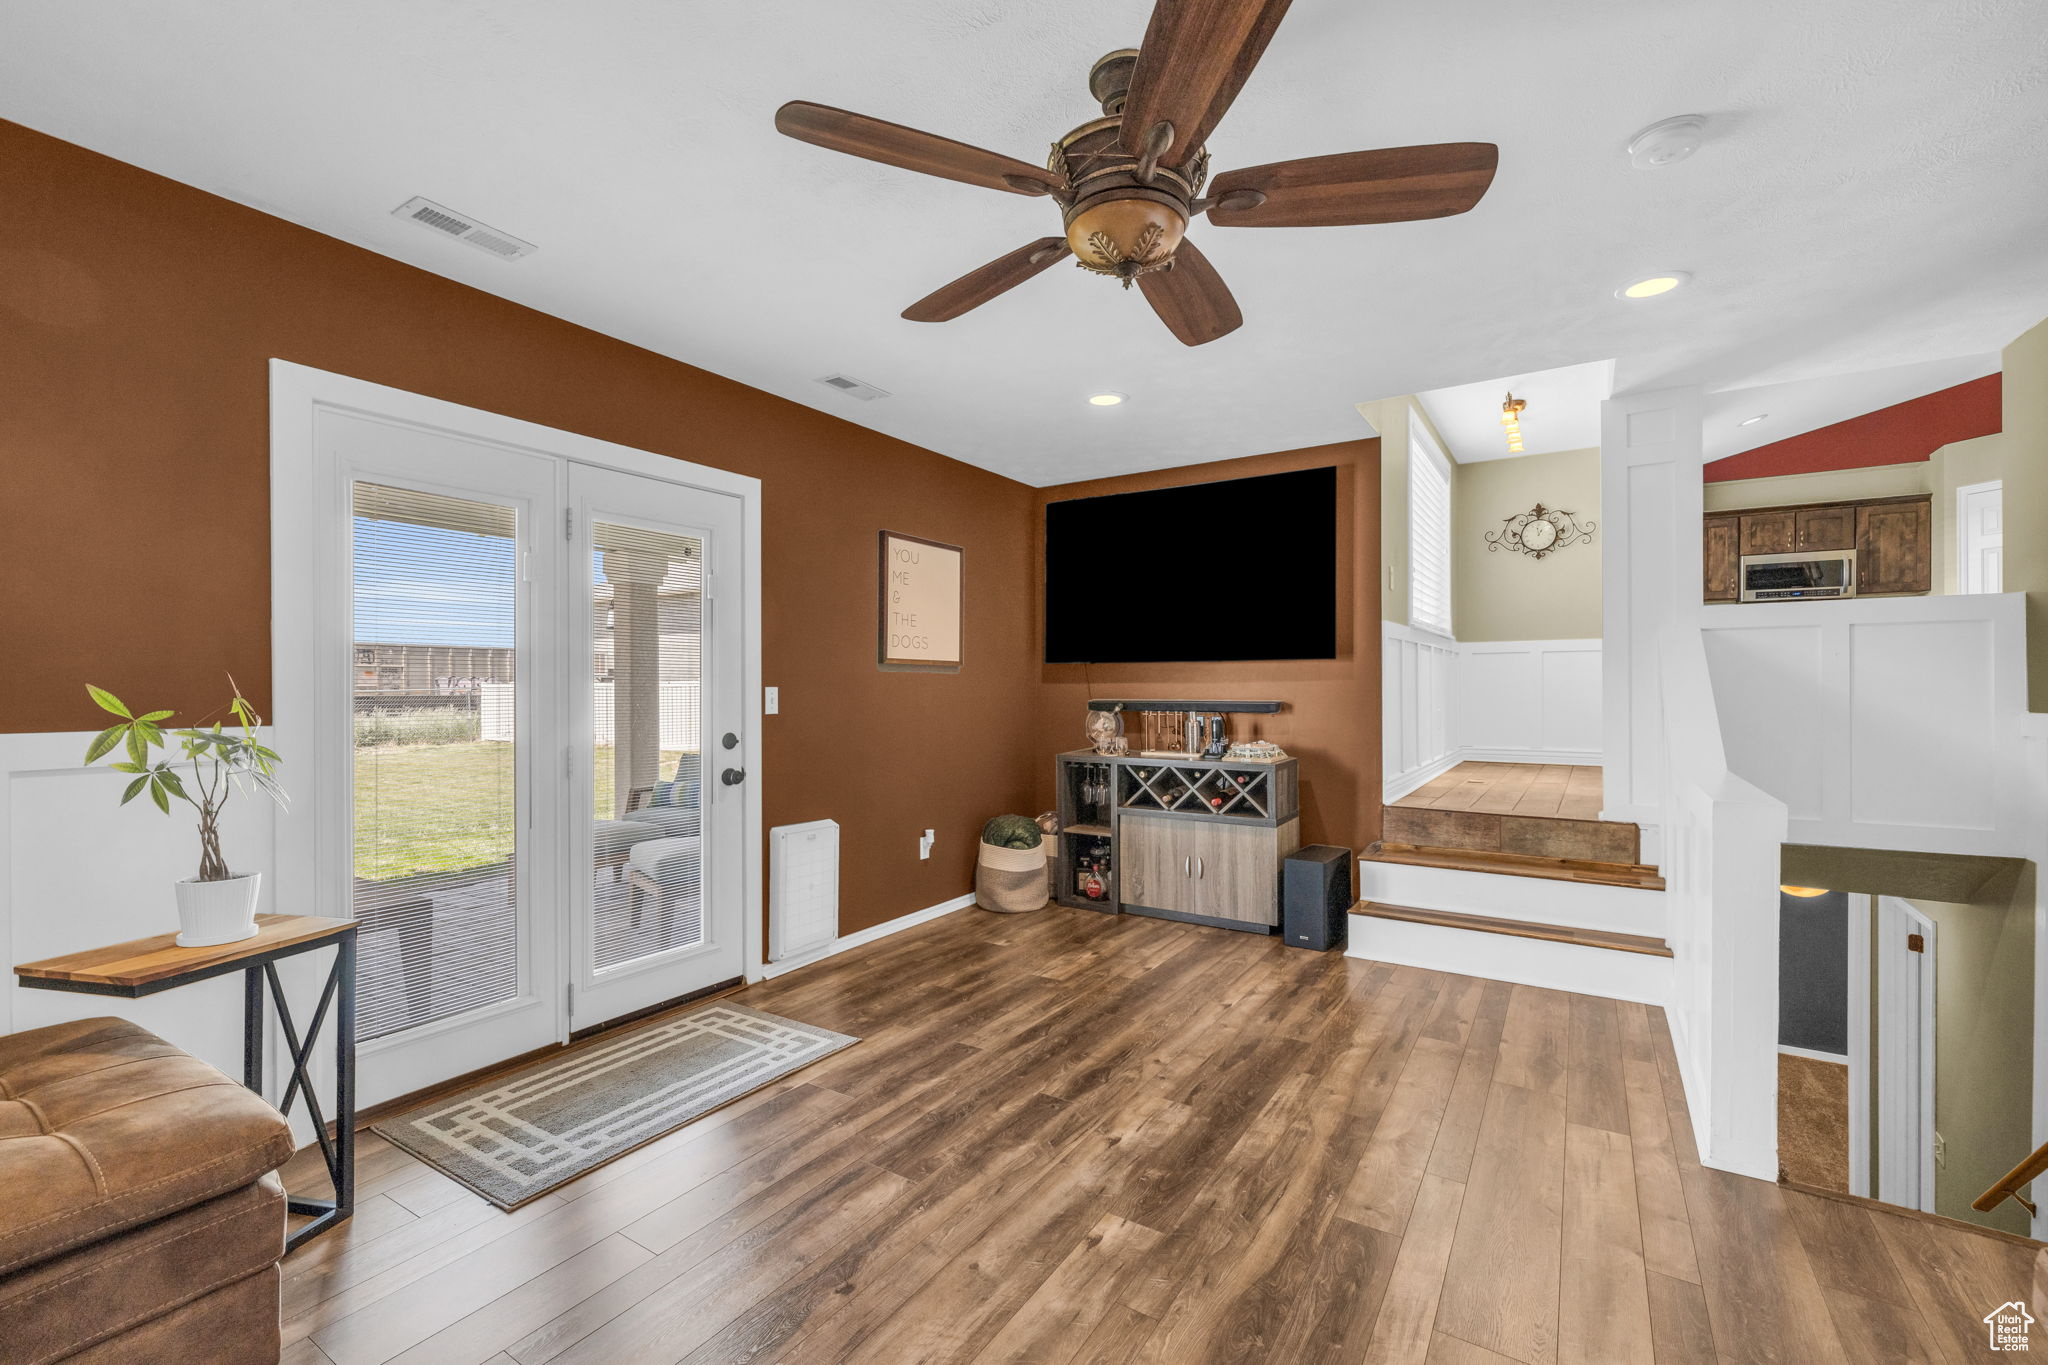 Entrance foyer with dark wood-type flooring and ceiling fan